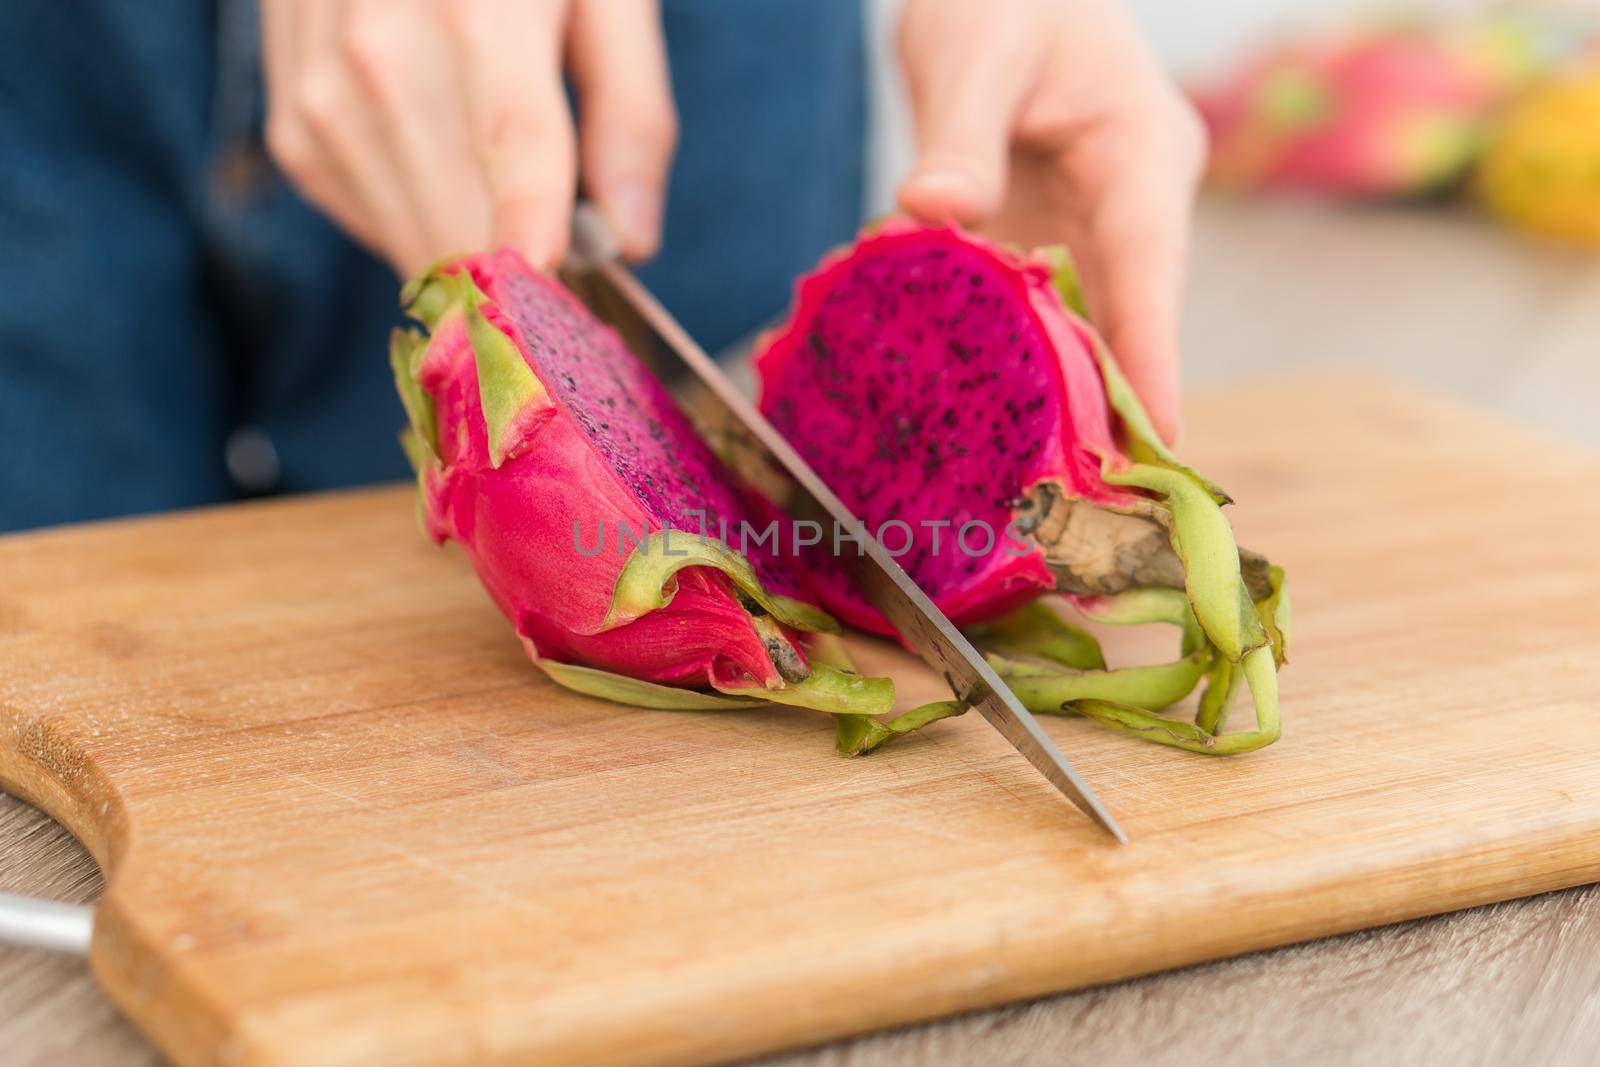 Female hands is cutting a dragon fruit or pitaya with pink skin and pulp with black seeds on wooden cut board on the table. Exotic fruits, healthy eating concept.